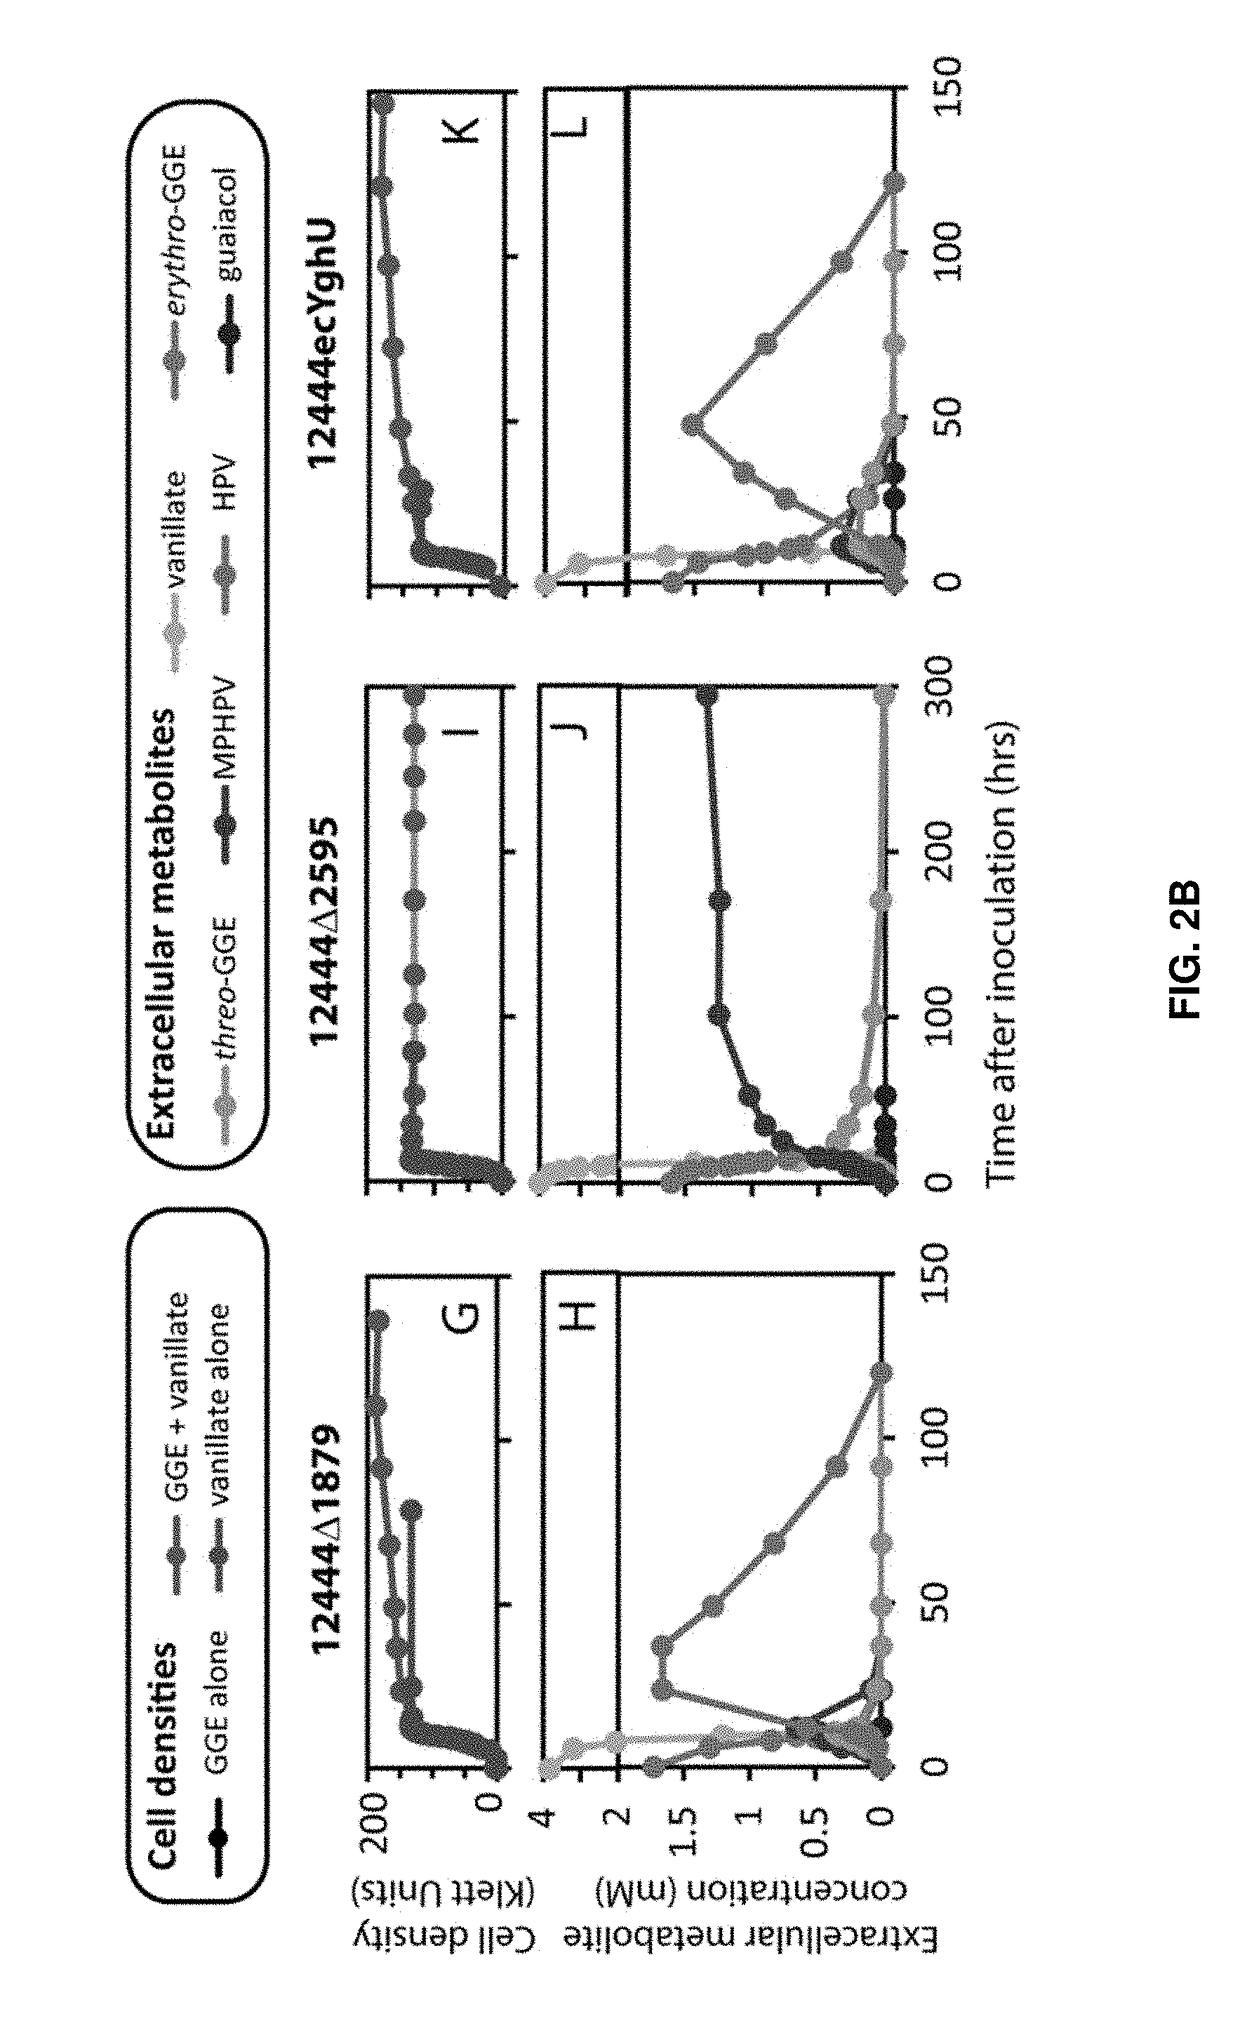 Enzymes and methods for processing lignin and other aromatic compounds